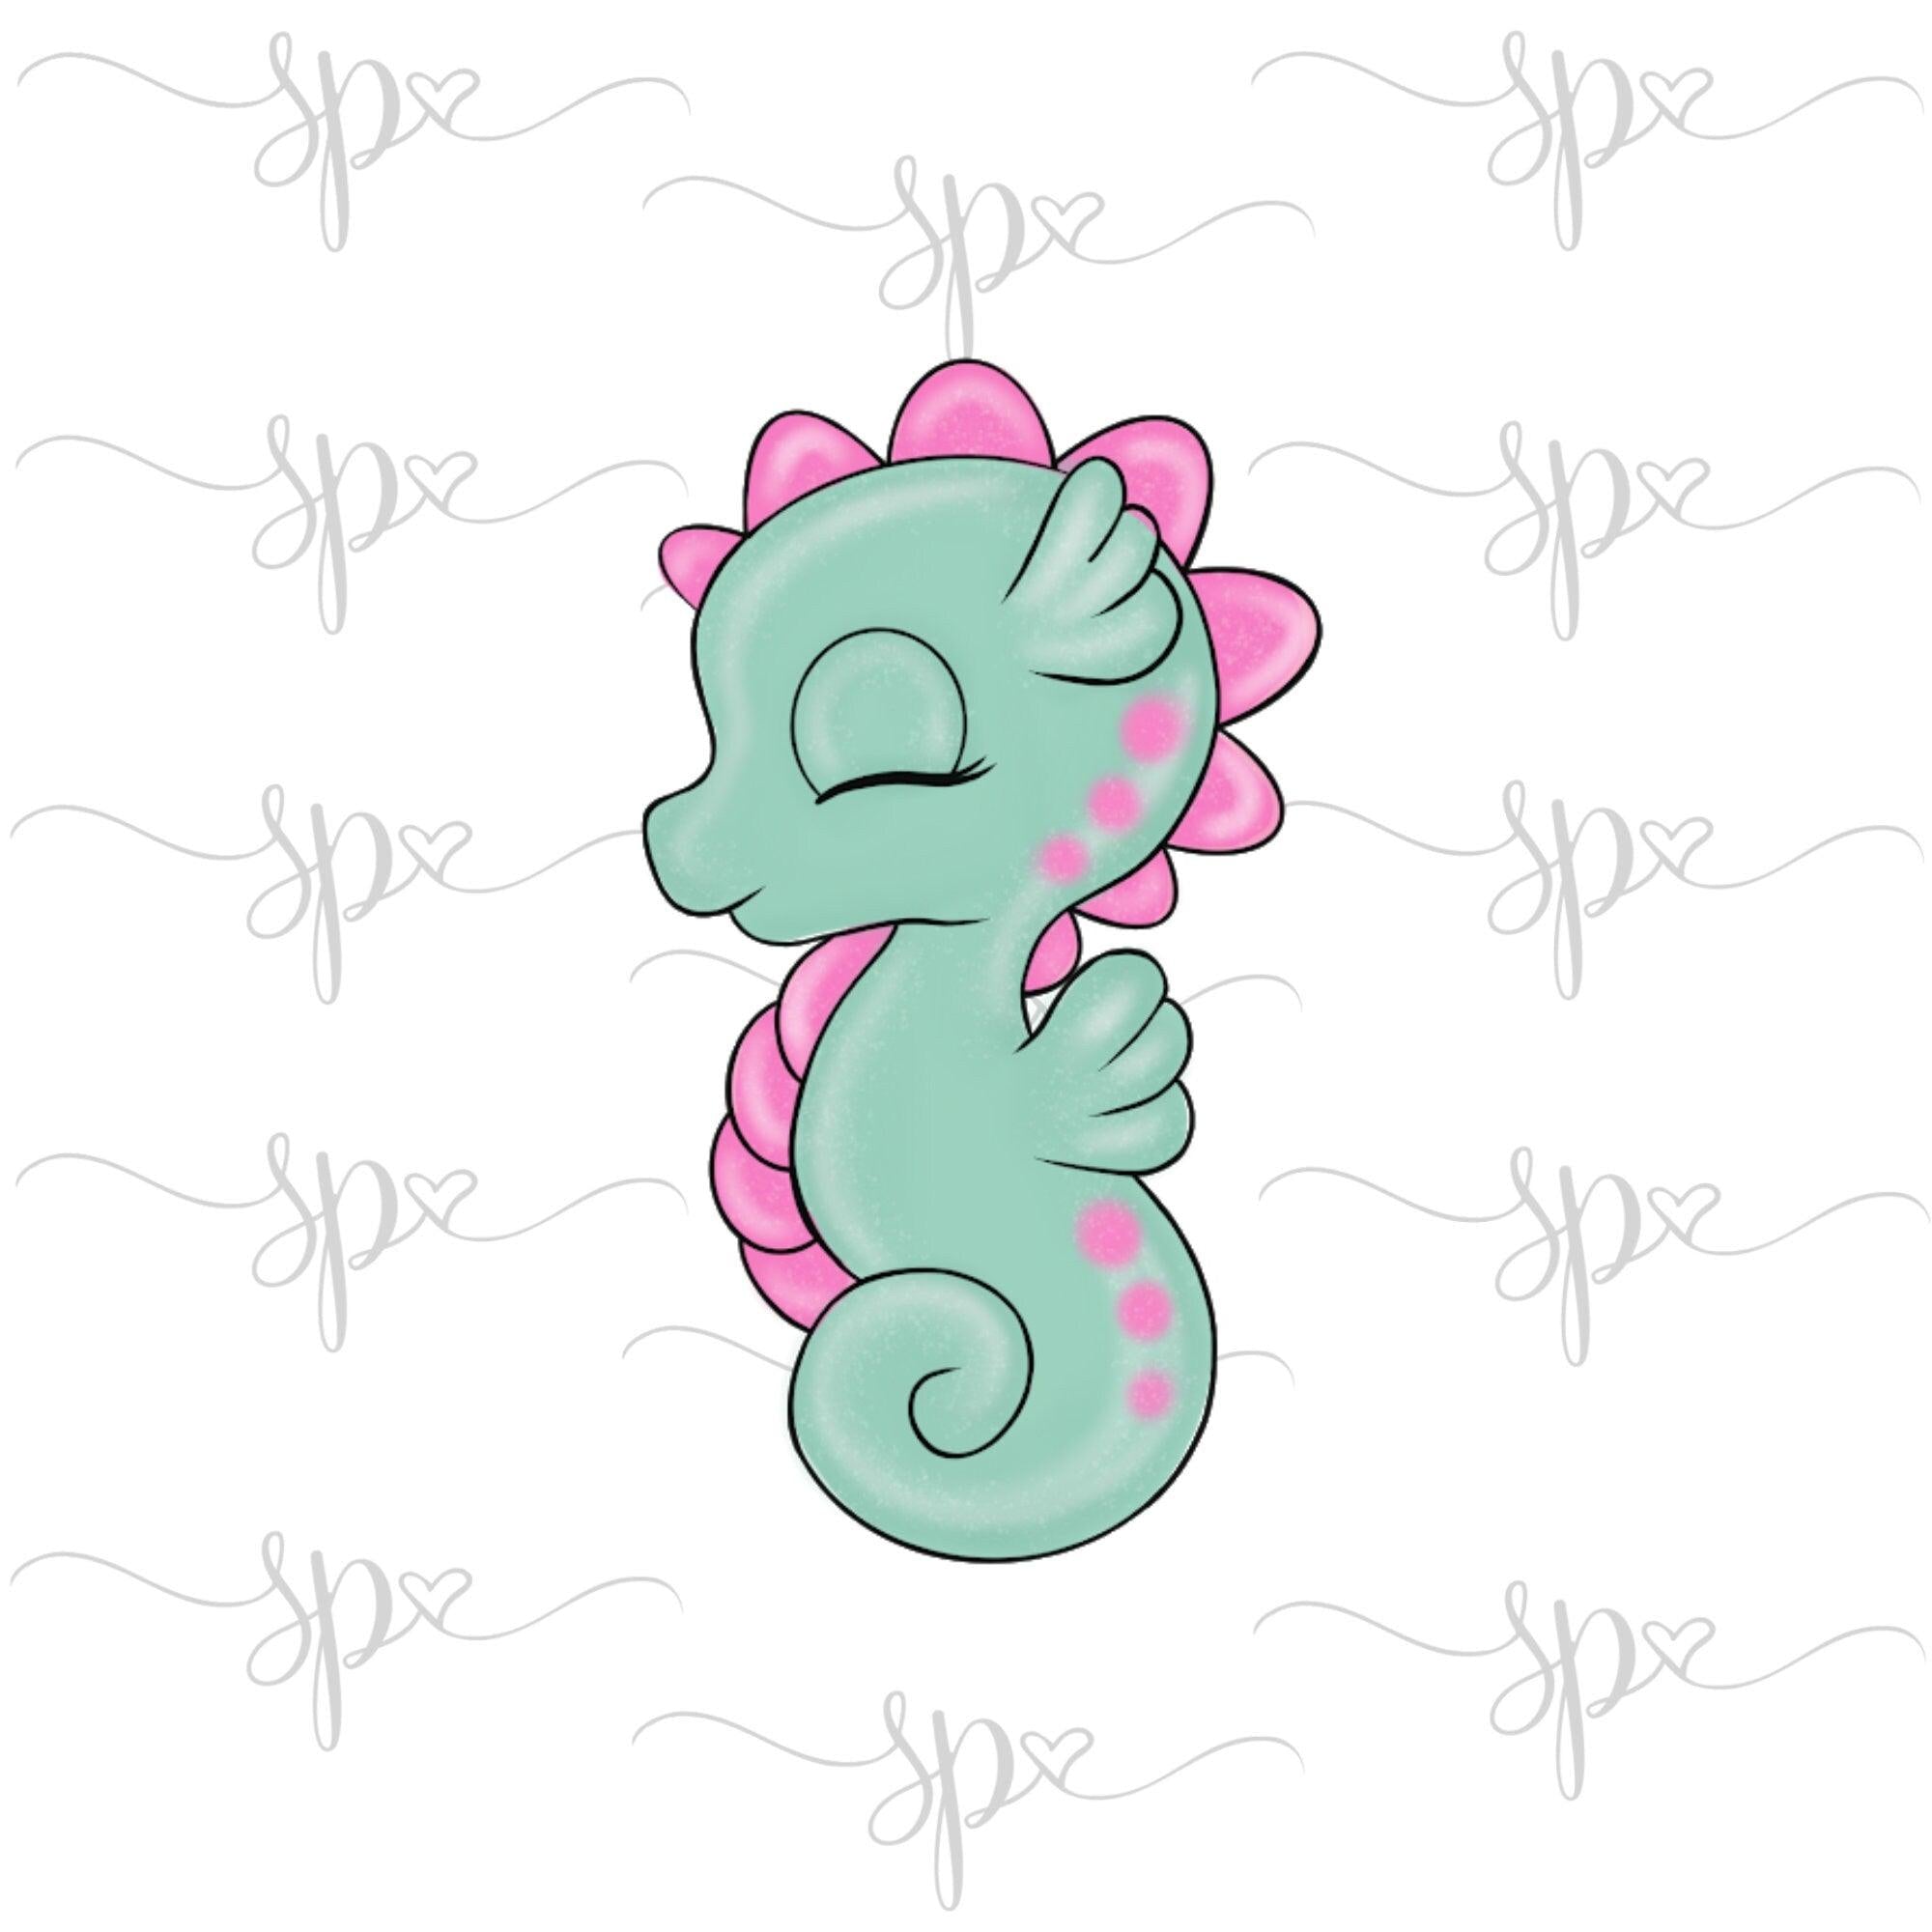 Seahorse 2 Cookie Cutter by Lady Milkstache - Sweetleigh 